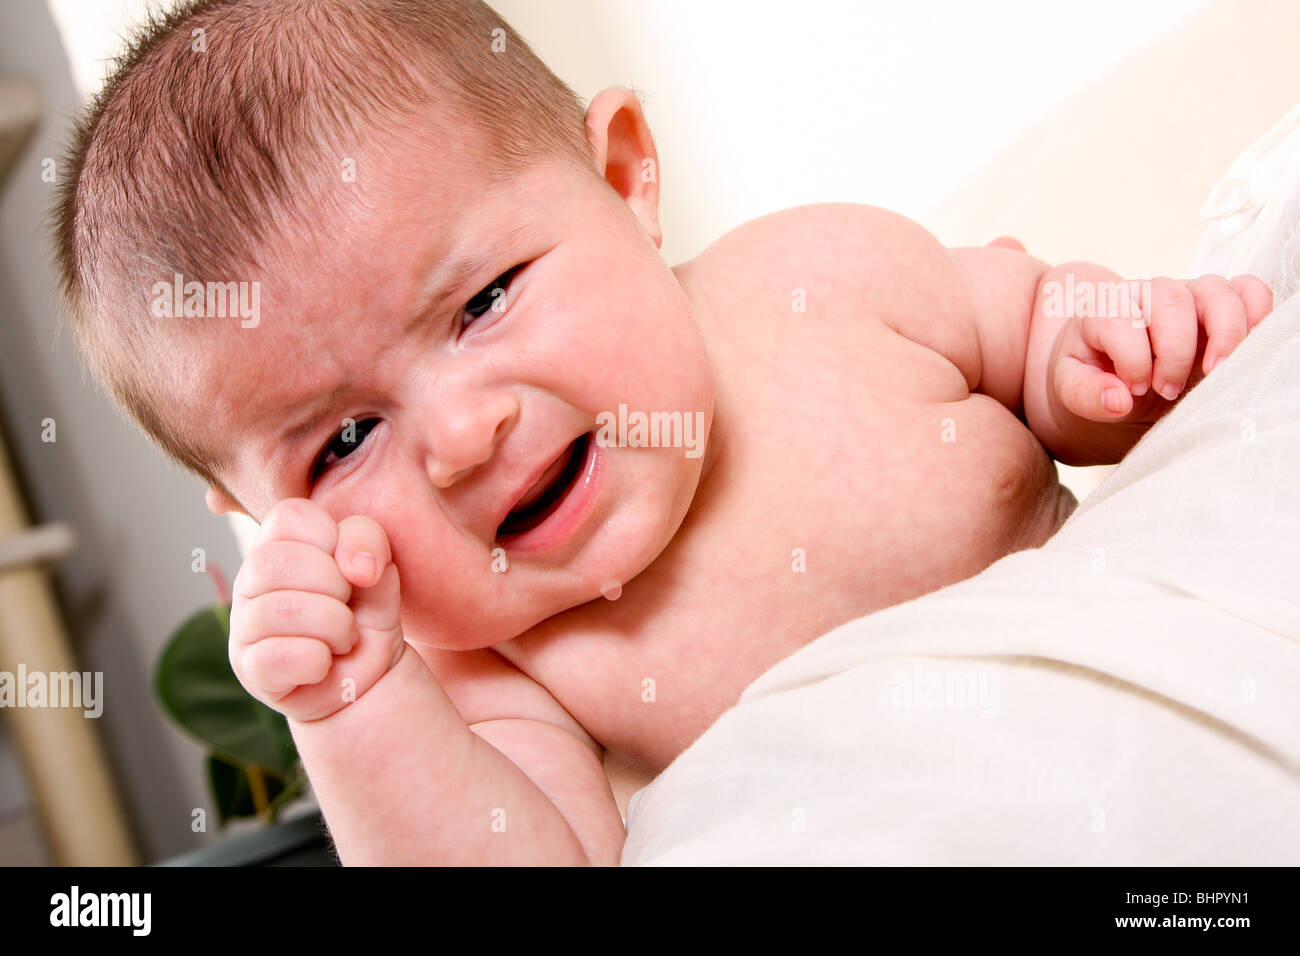 Face of an unhappy unisex Caucasian Hispanic baby crying with tears while rubbing eye. Stock Photo